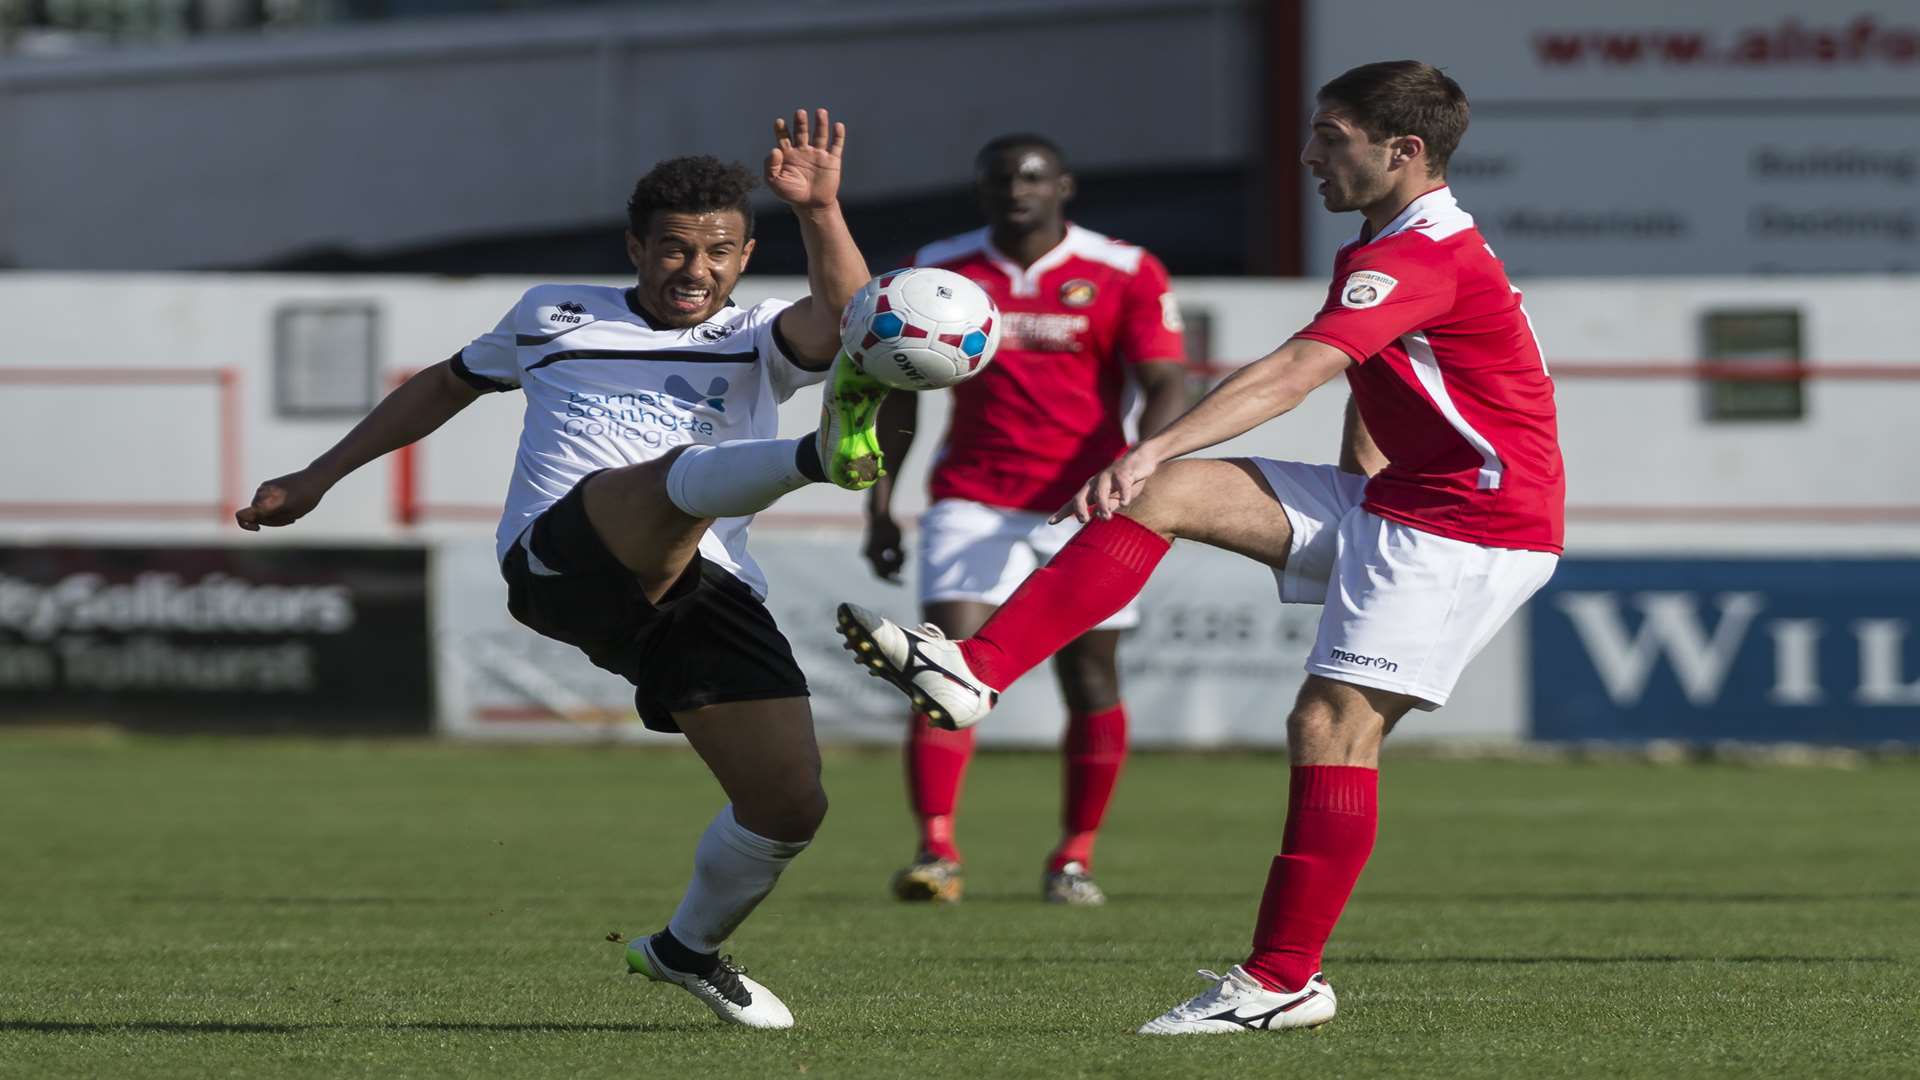 Michael West challenges for the ball against Boreham Wood Picture: Andy Payton